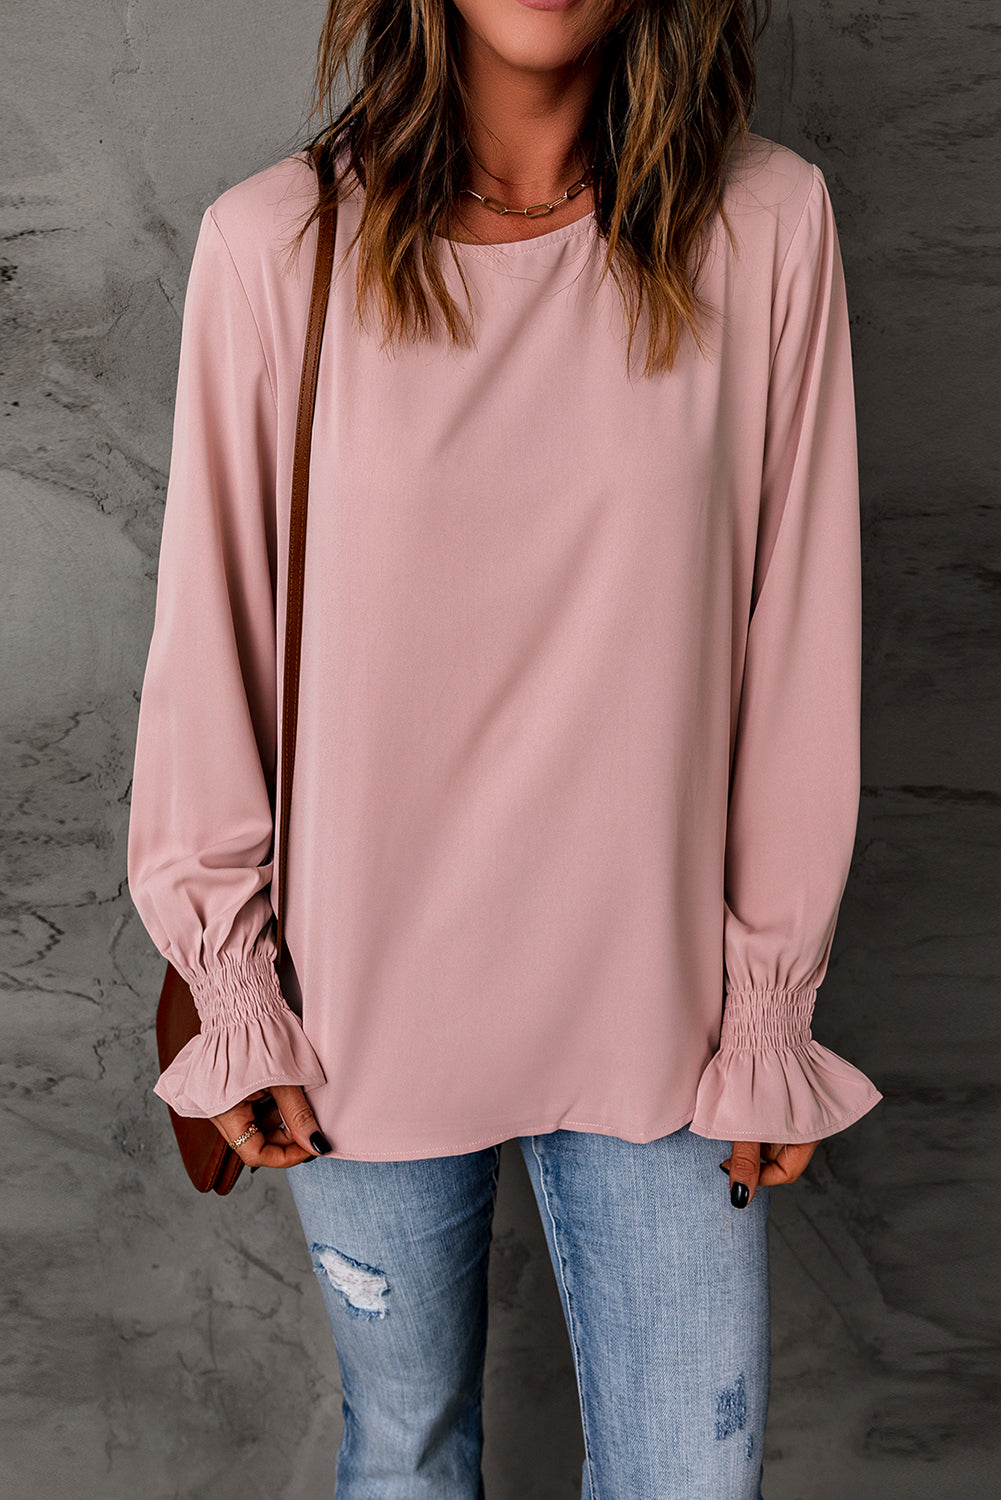 Blouse Rose Manches Bouffantes Femme Chic